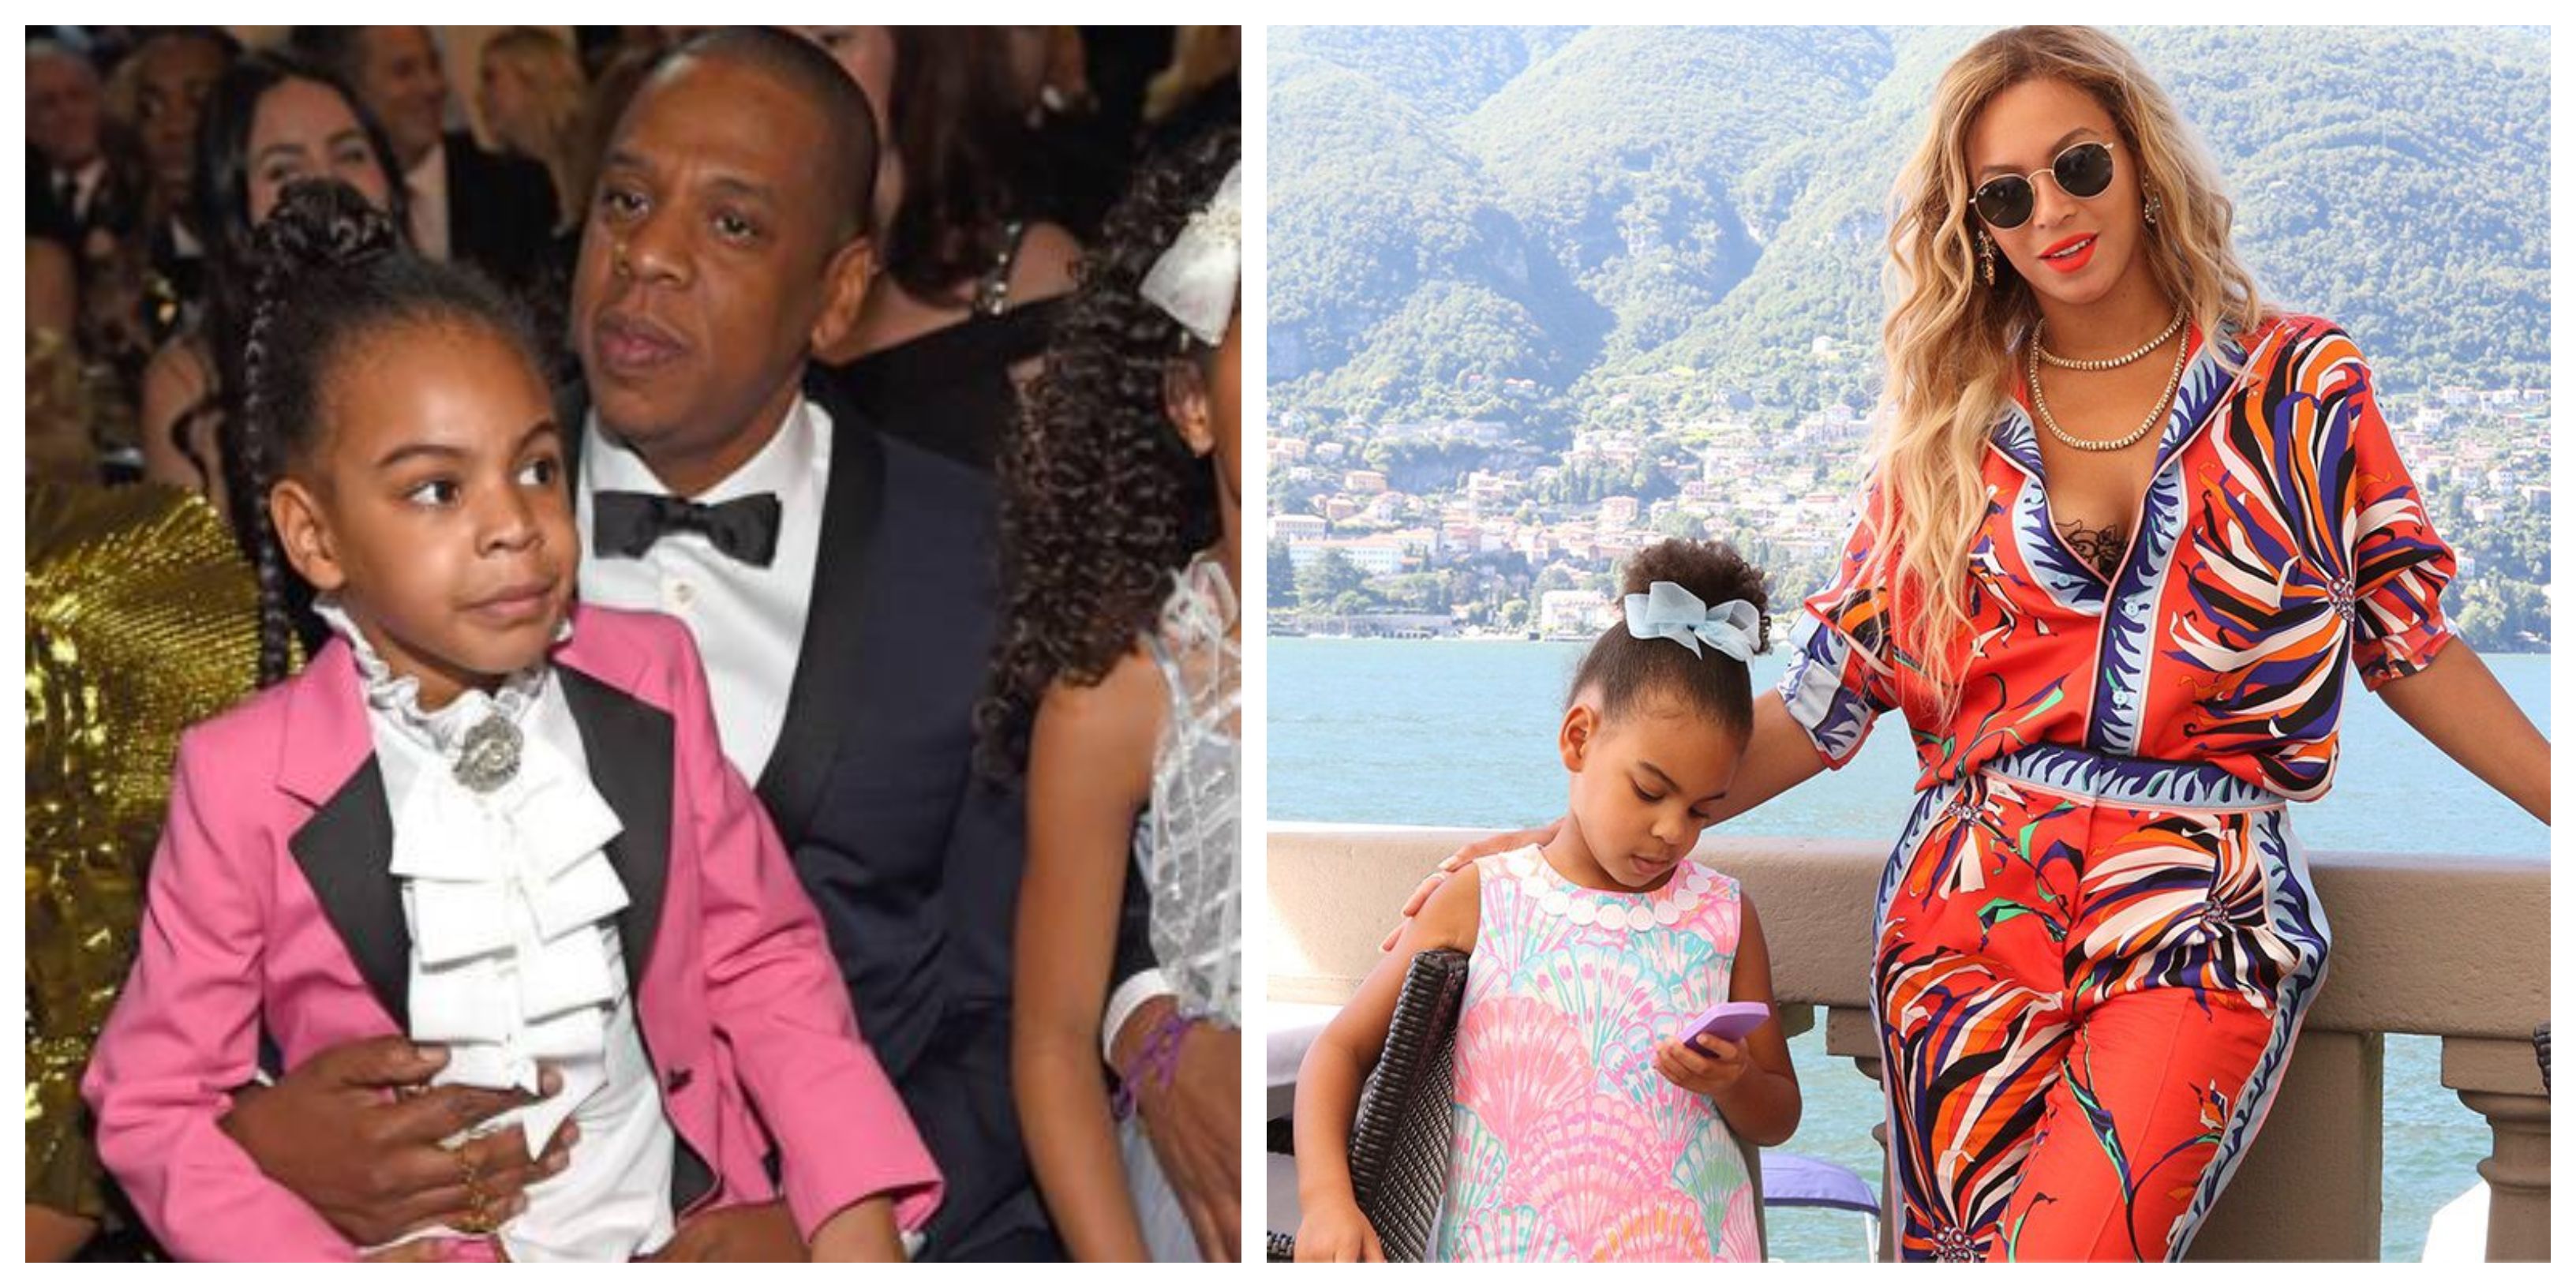 10 Places Where Blue Ivy Looks Bored (10 Places She Actually Enjoys)